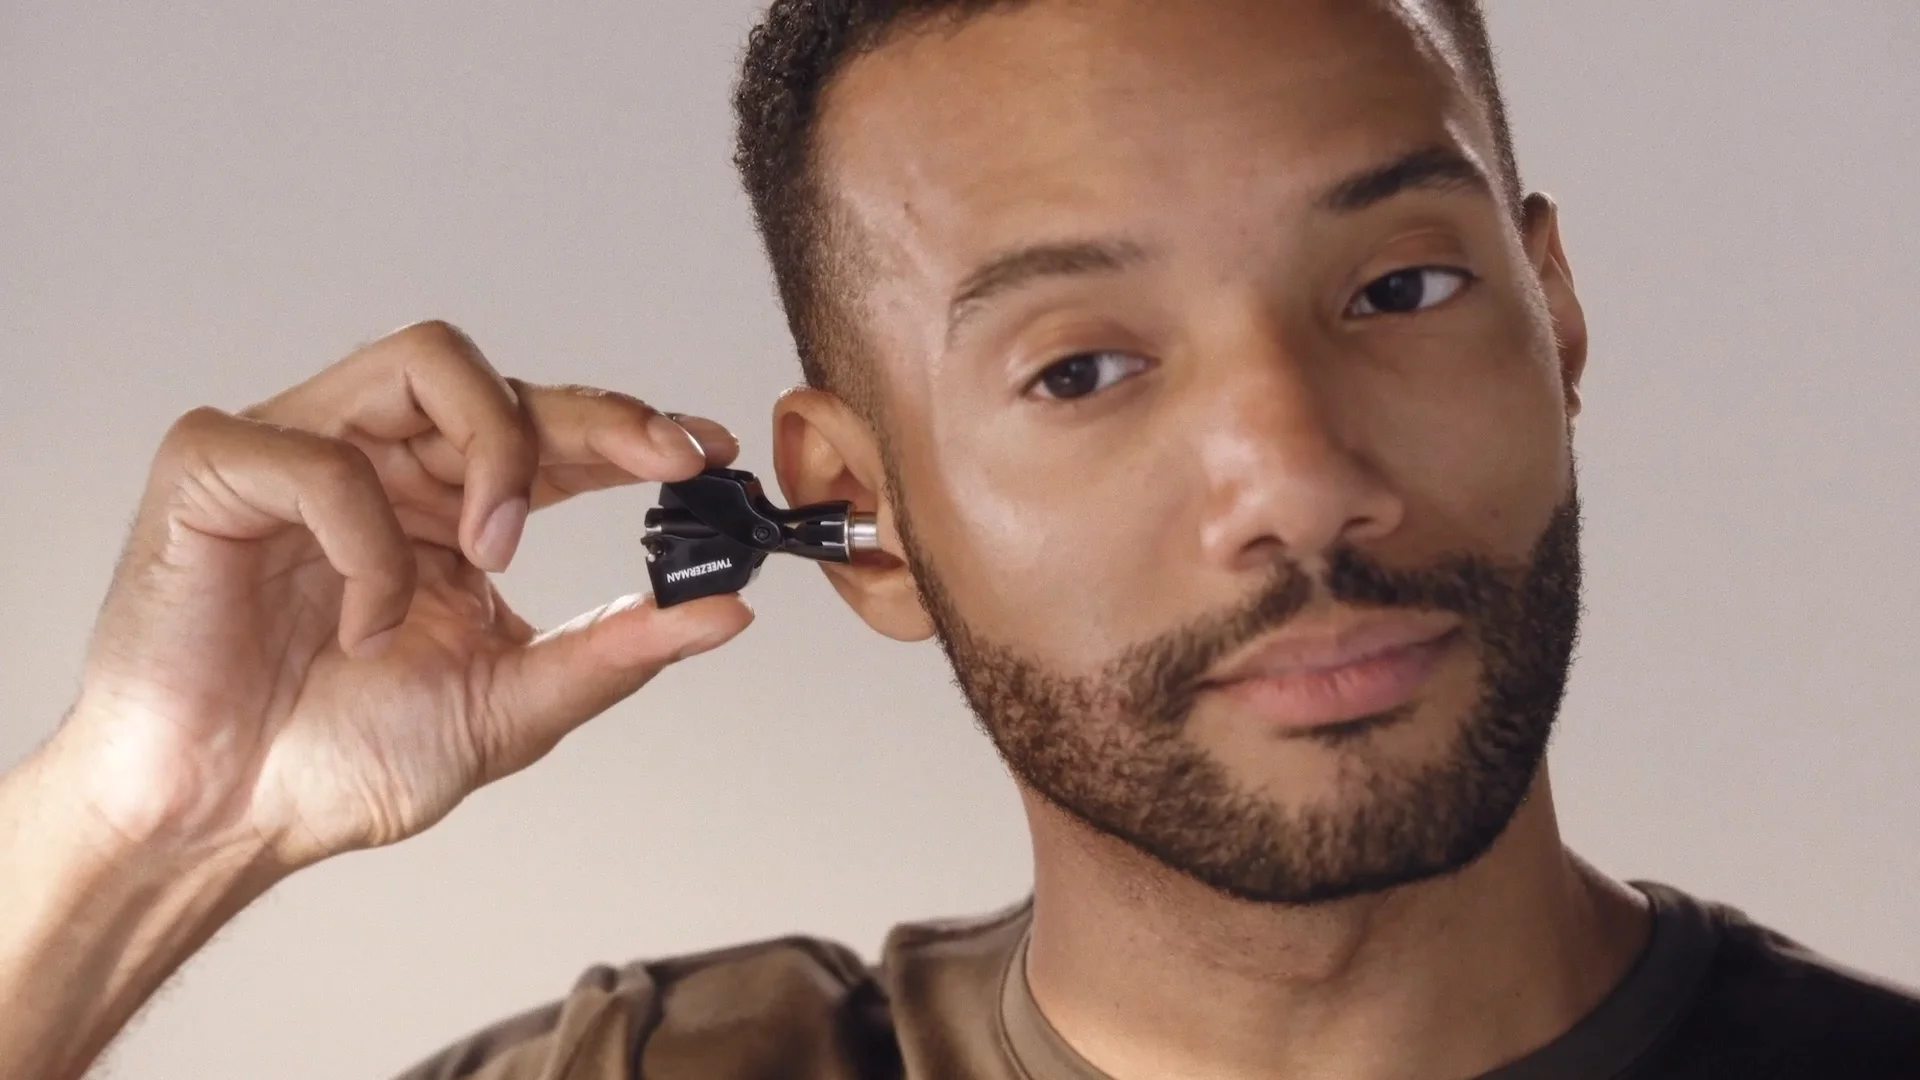 Deluxe Nose & Ear Hair Trimmer How-To on Vimeo